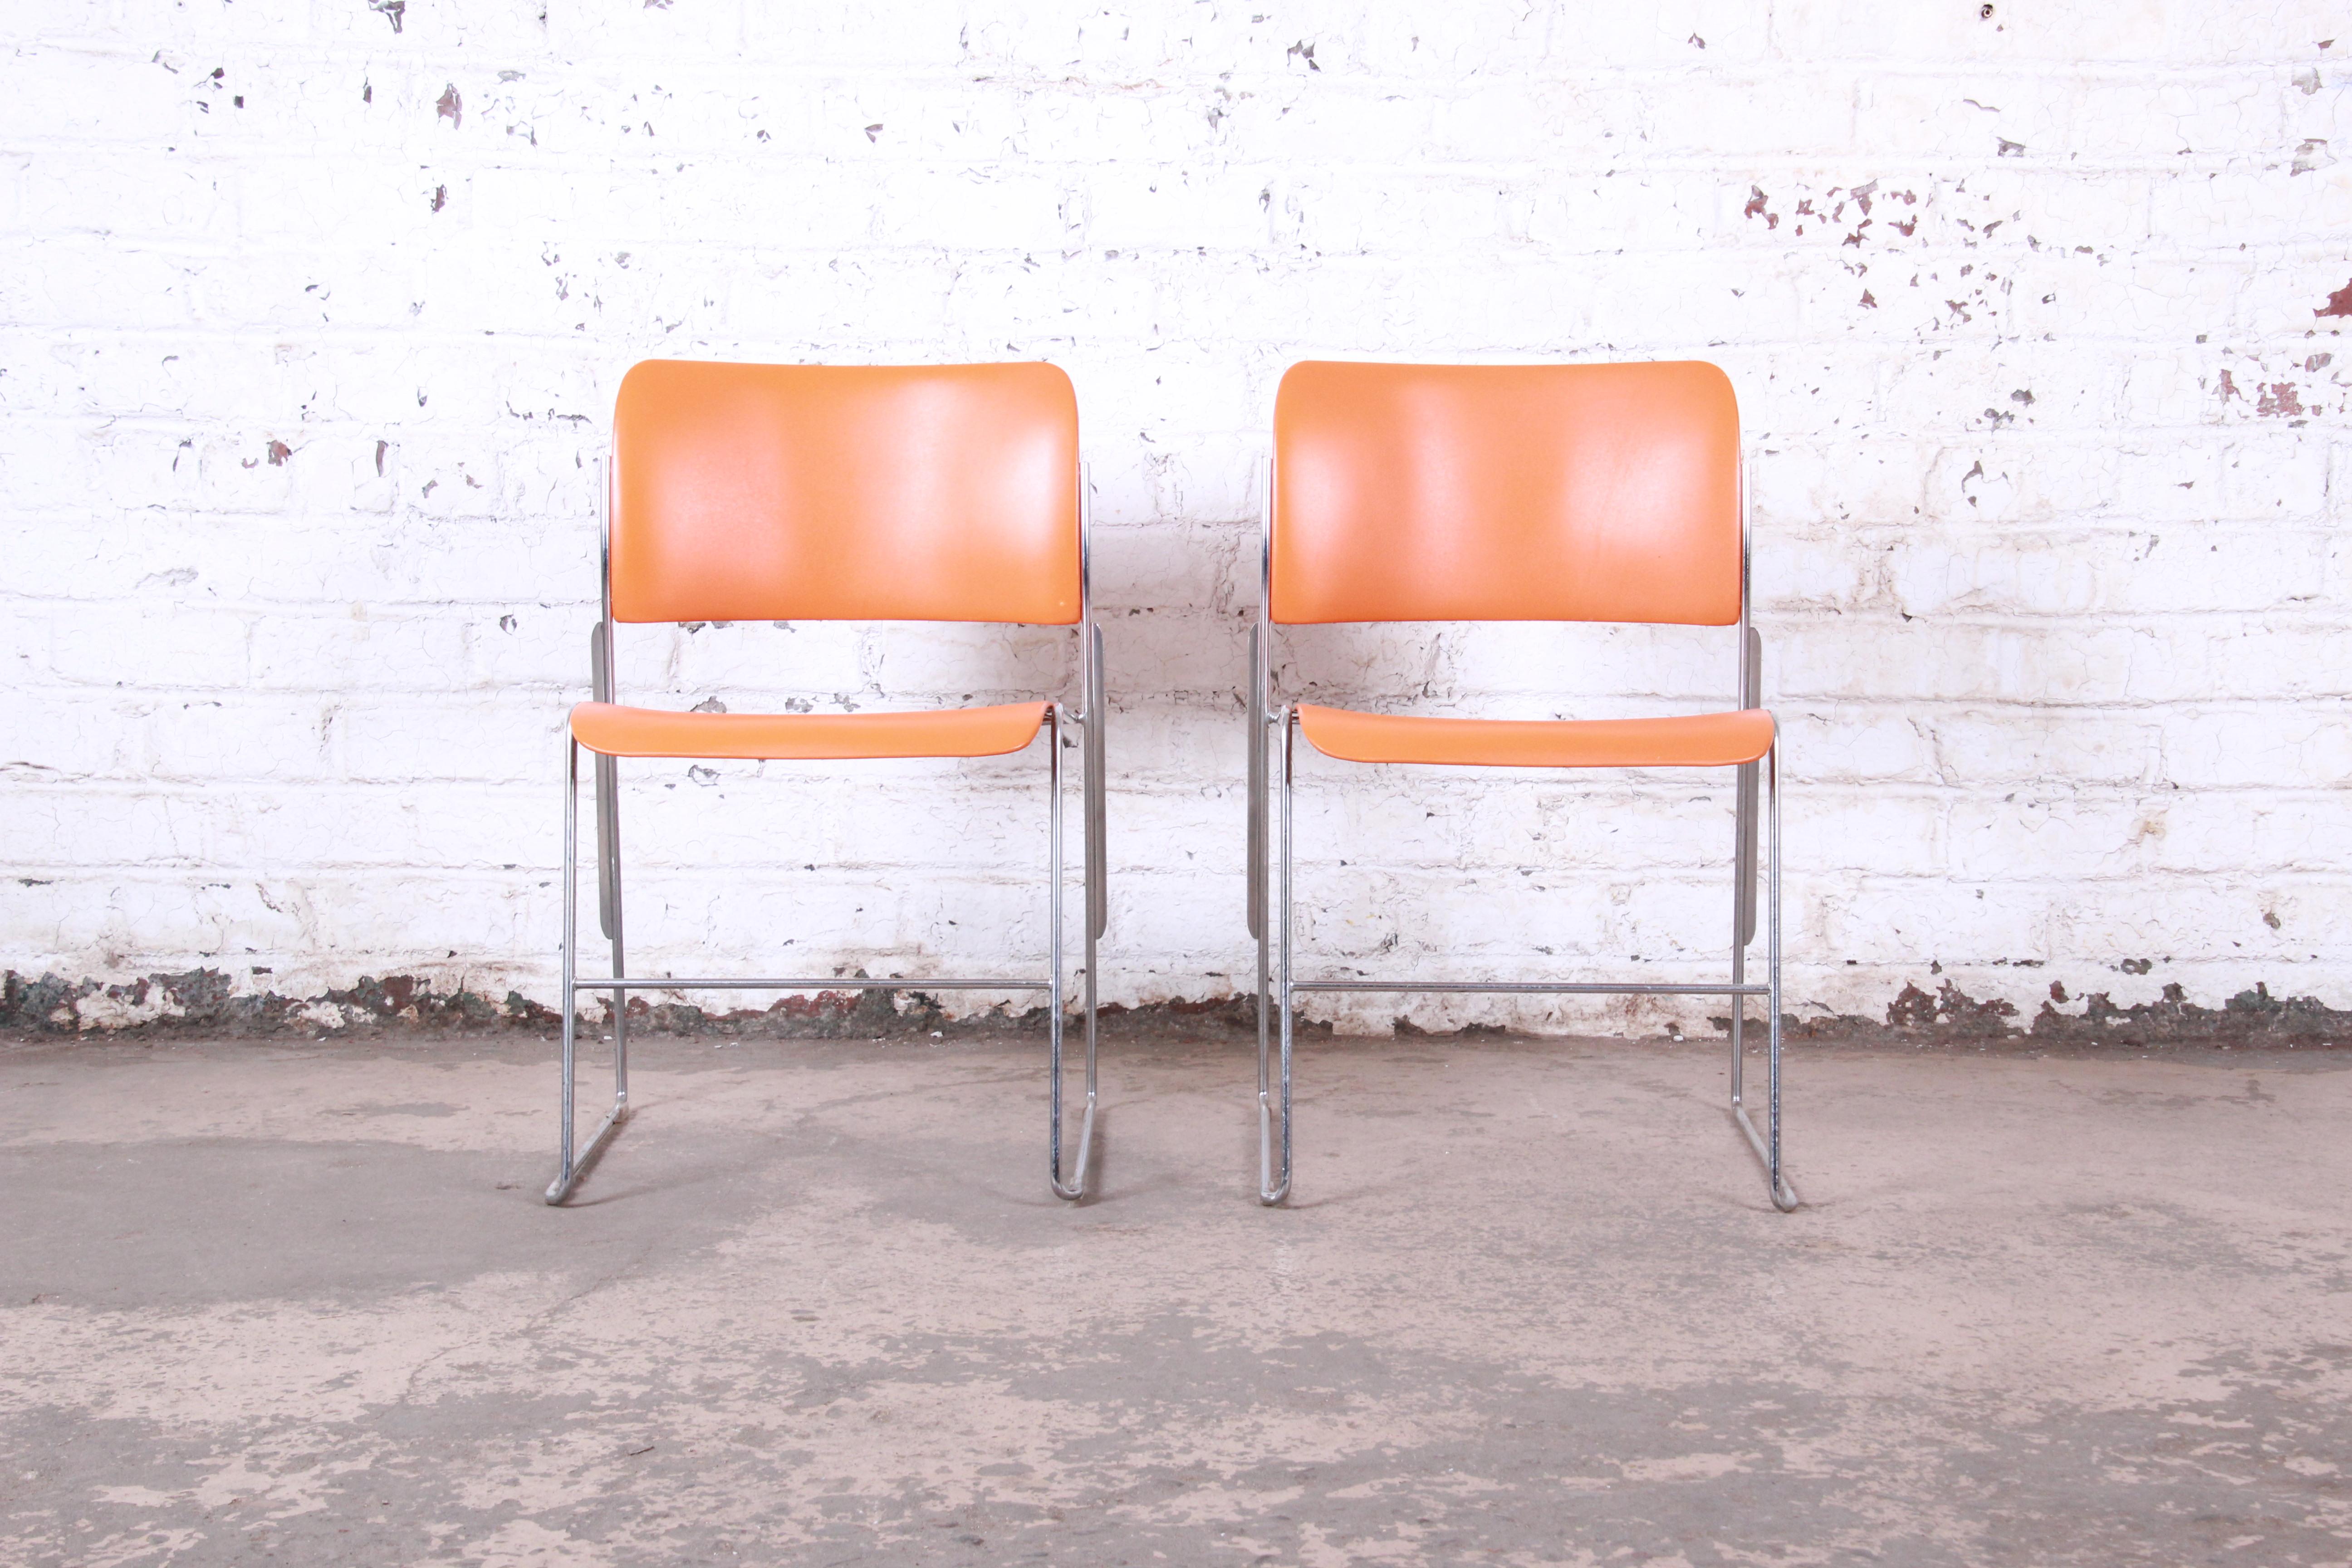 Vintage 40/4 orange and chrome stacking chairs

Designed by David Rowland,

USA, 1977

Chrome and orange powder-coated steel

Measures: 20.13